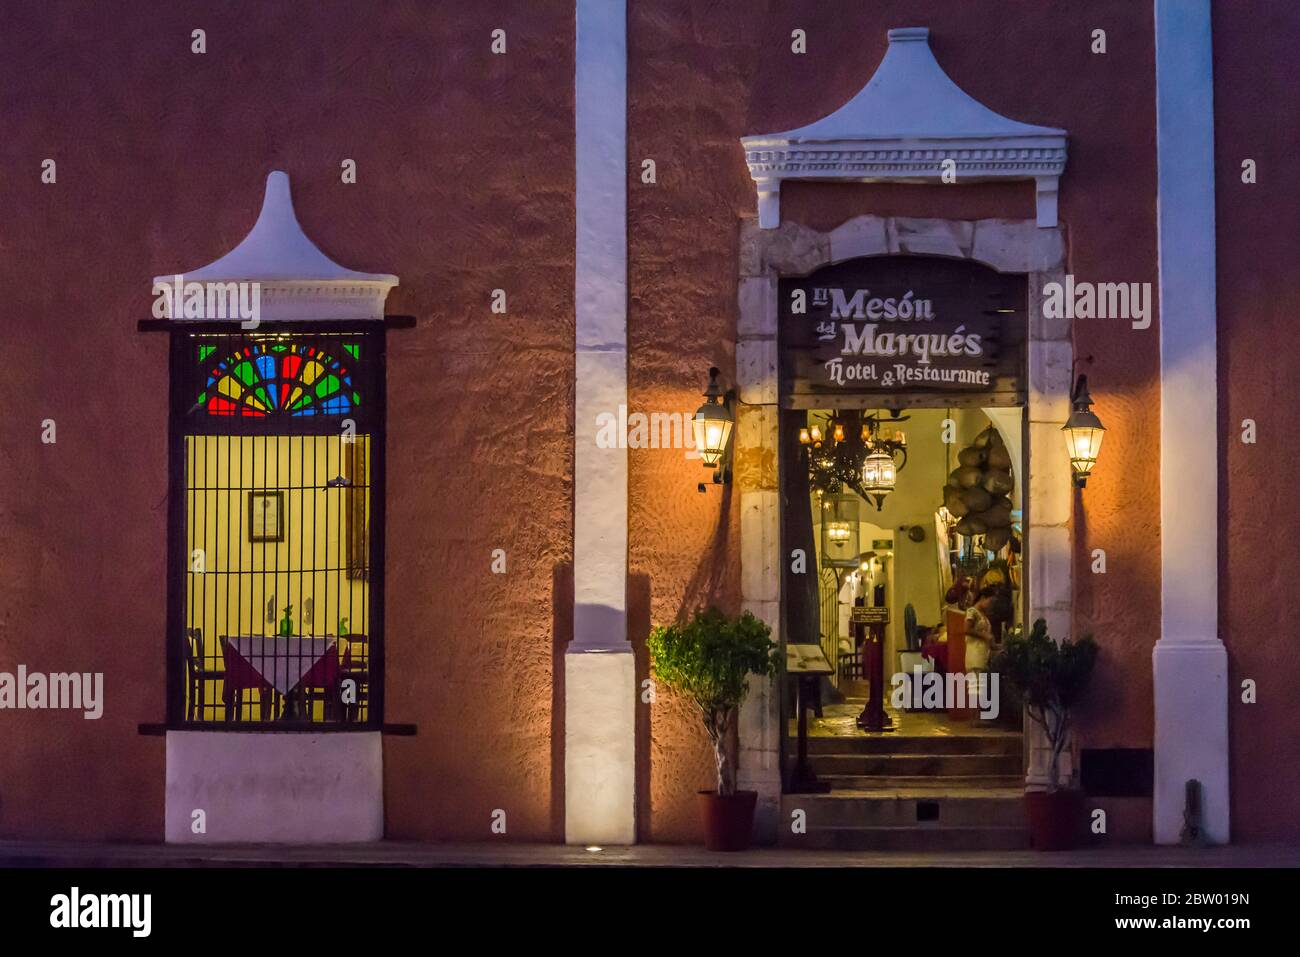 Hotel and restaurant at night, Valladolid, Mexico Stock Photo